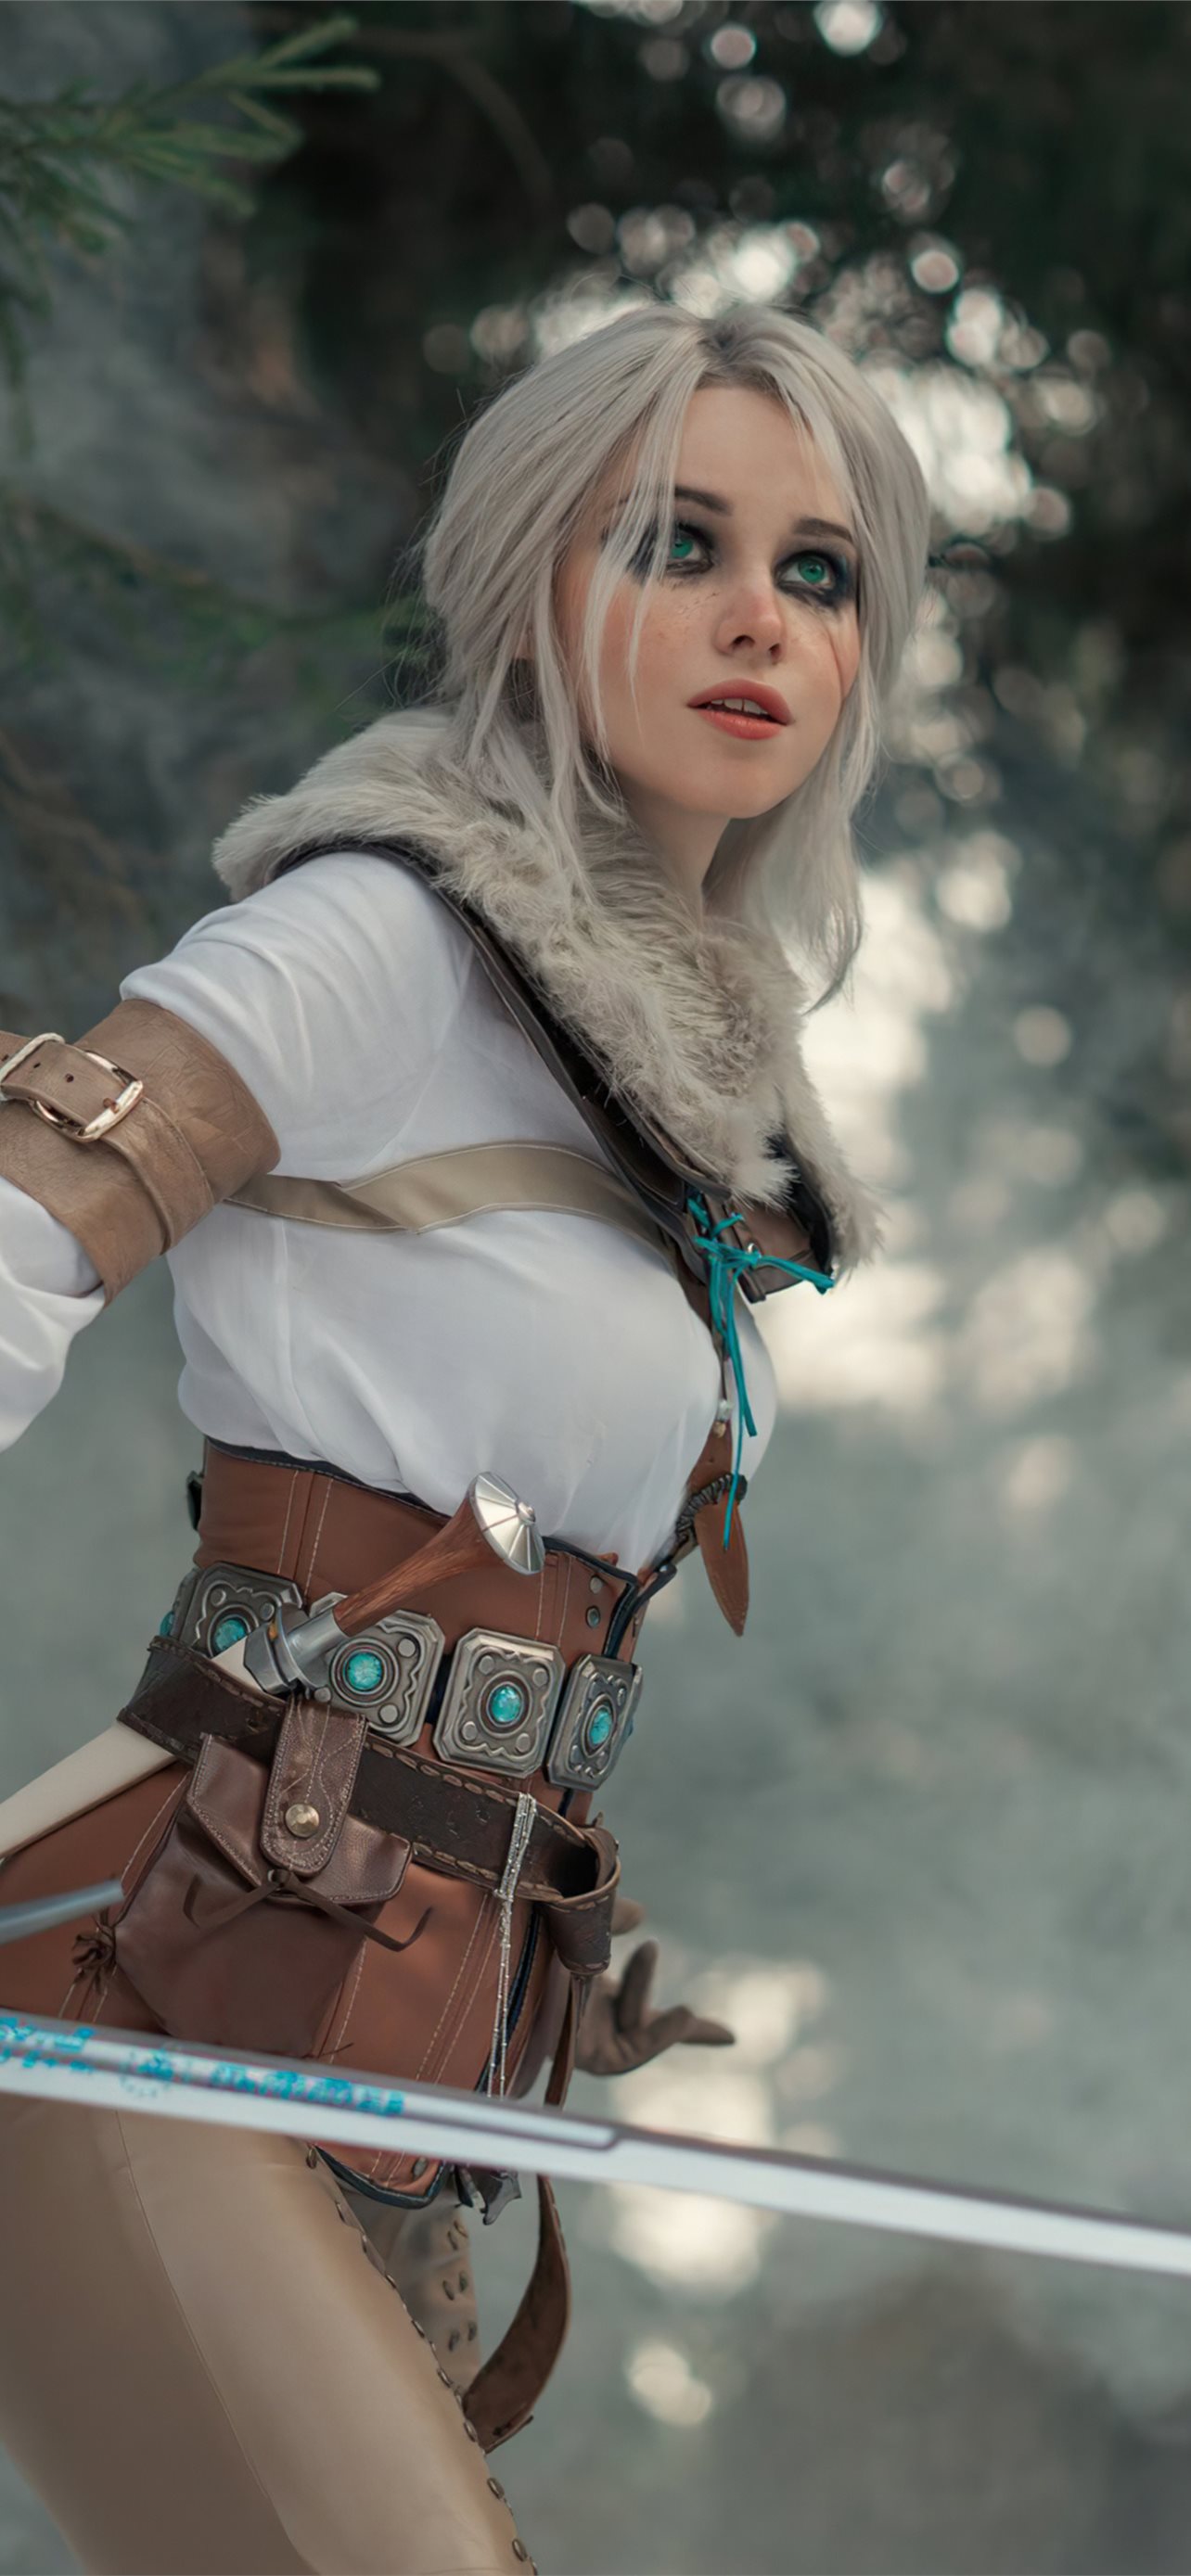 ciri the witcher 3 cosplay 4k iPhone wallpaper 